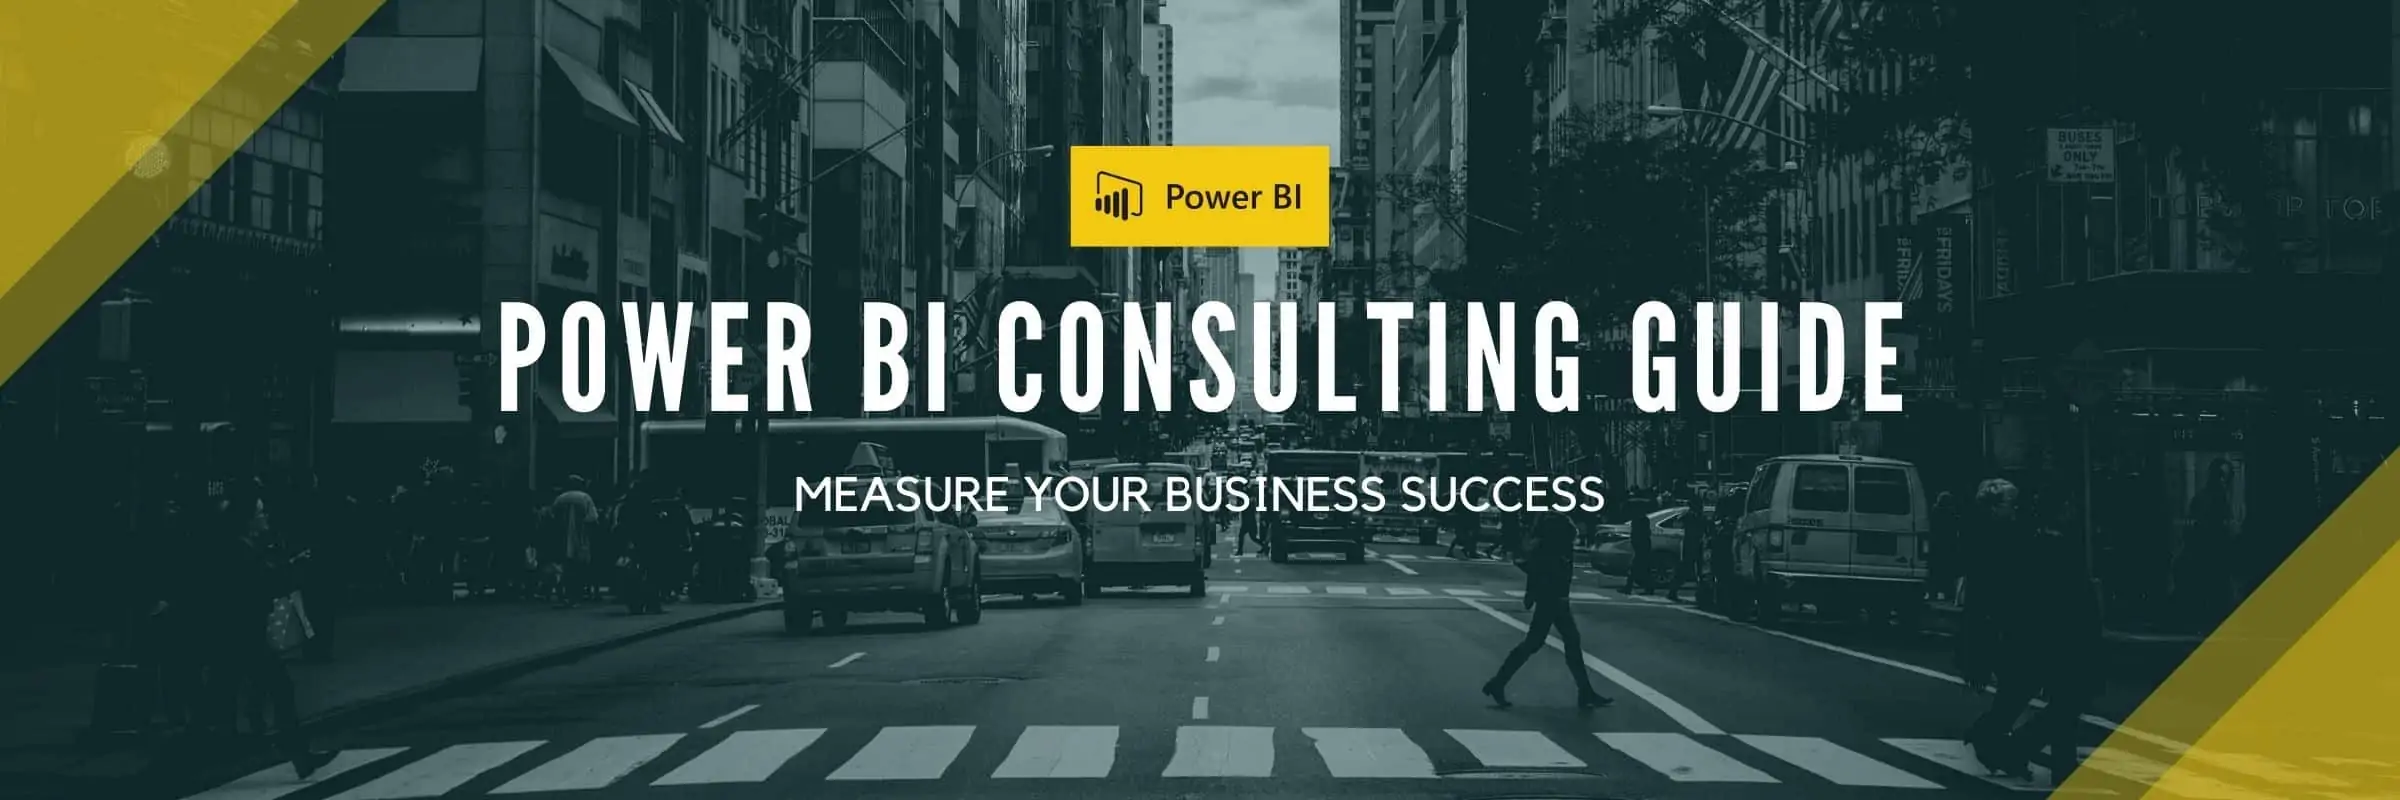 Measuring Business Success with Power BI: A Consulting Guide